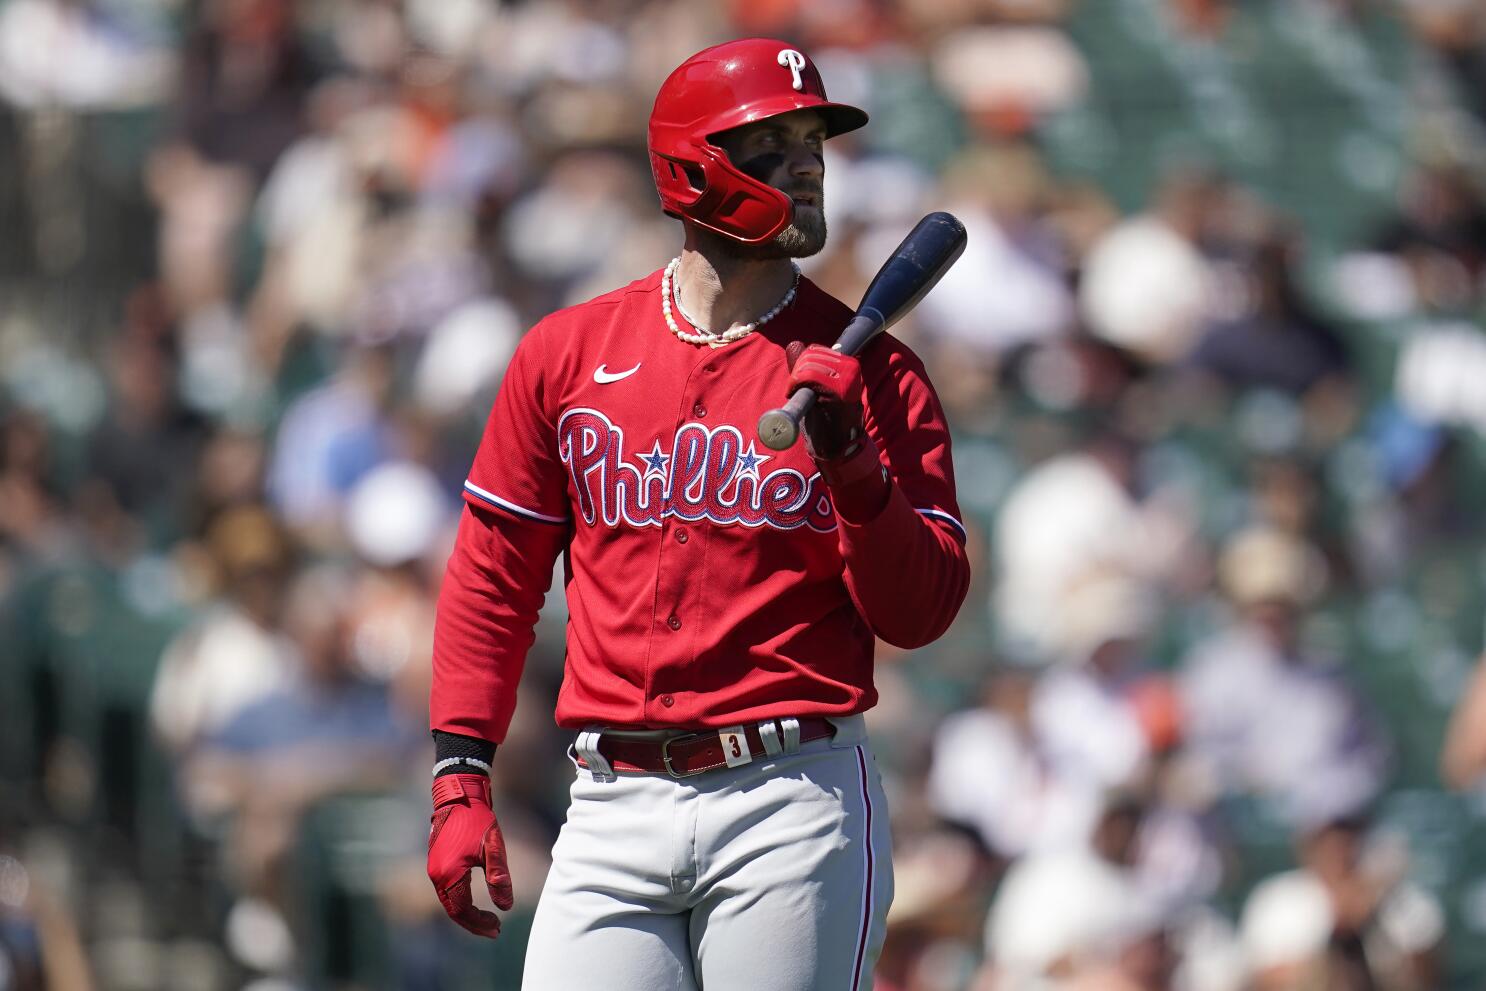 After a four-run first, Phillies HOLD ON to beat the Cardinals, 5-3